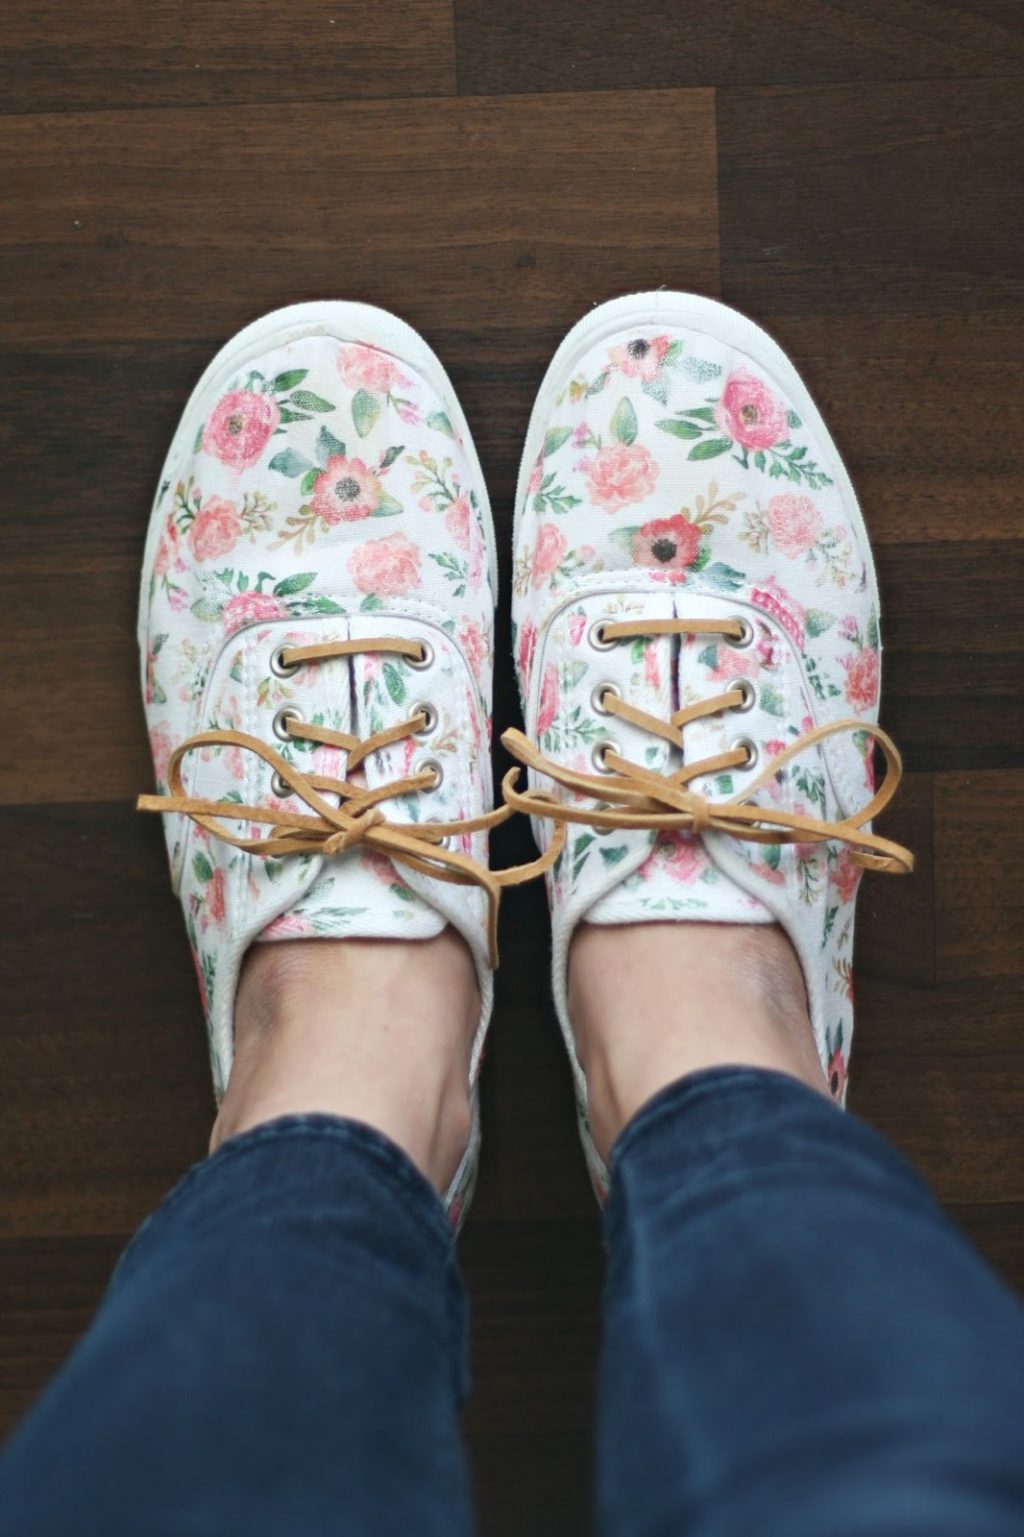 DIY Floral Sneakers | The Pretty Life Girls